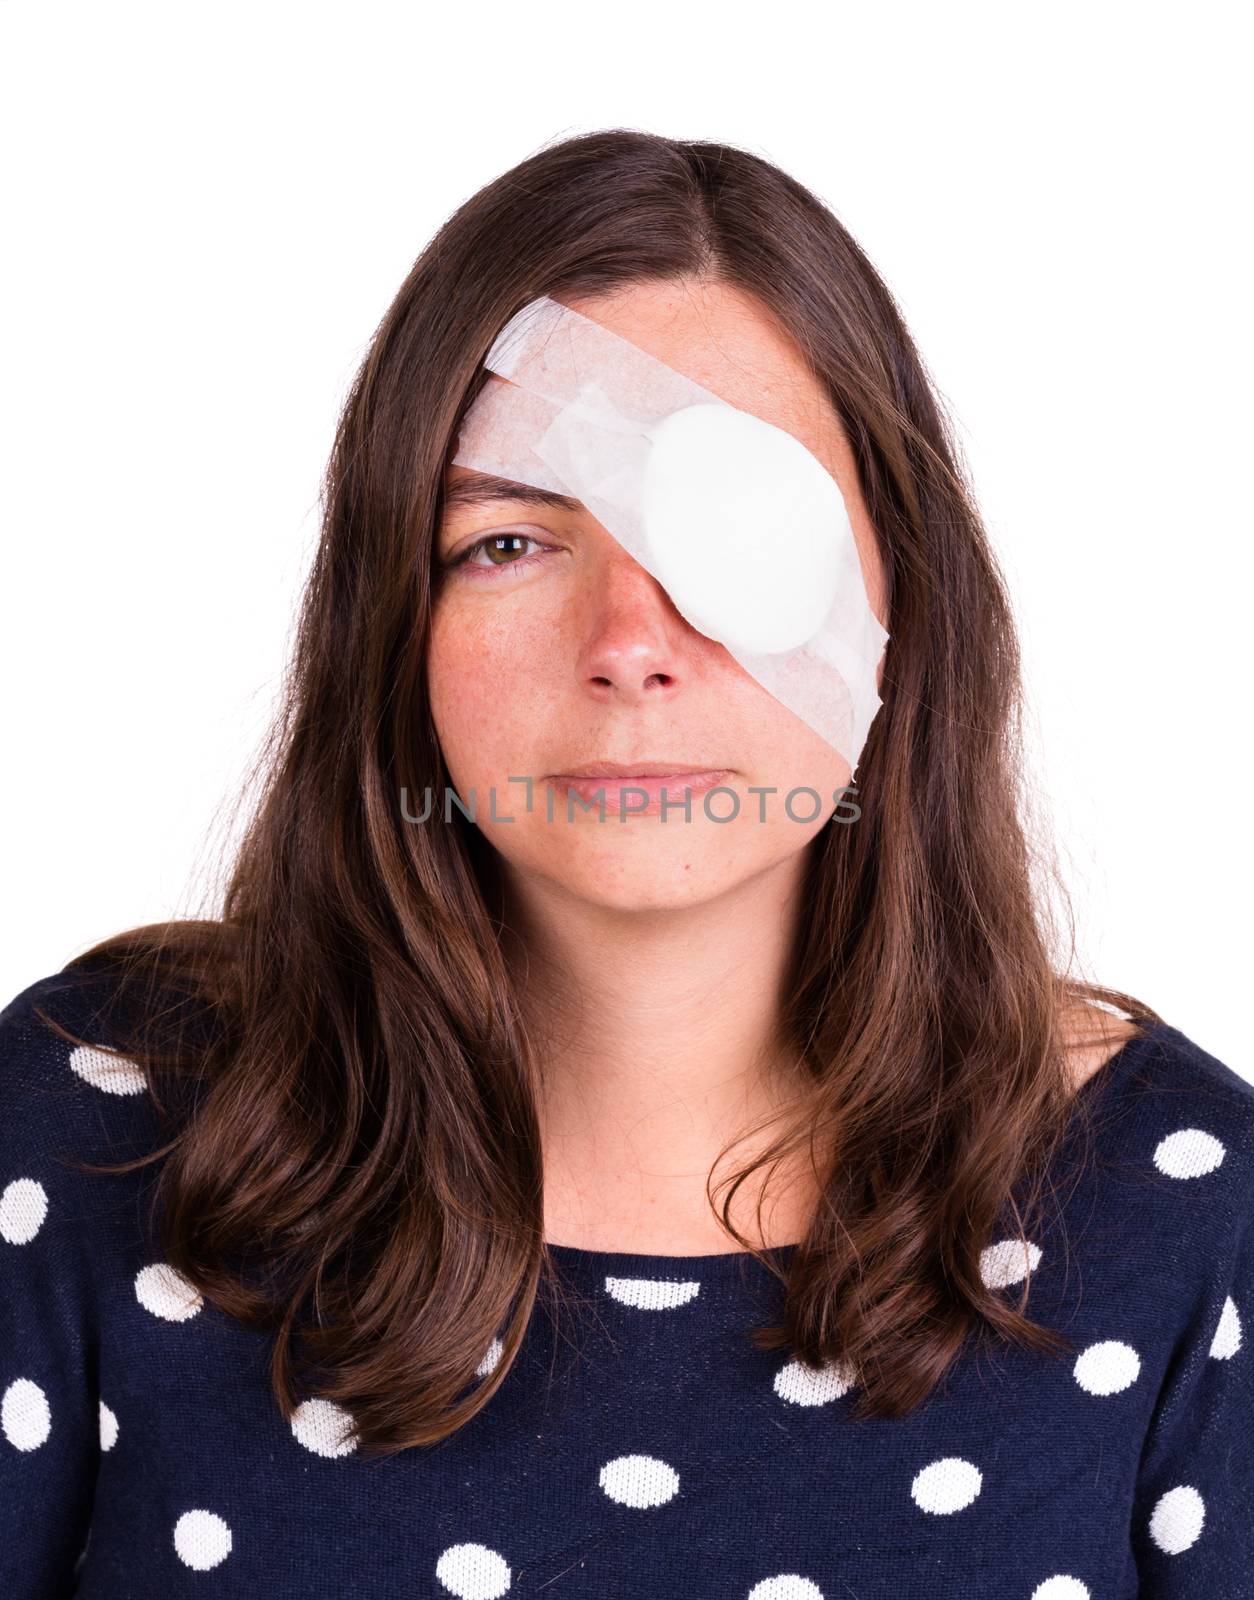 Portrait of woman wearing eye patch as protection after injury by michaklootwijk